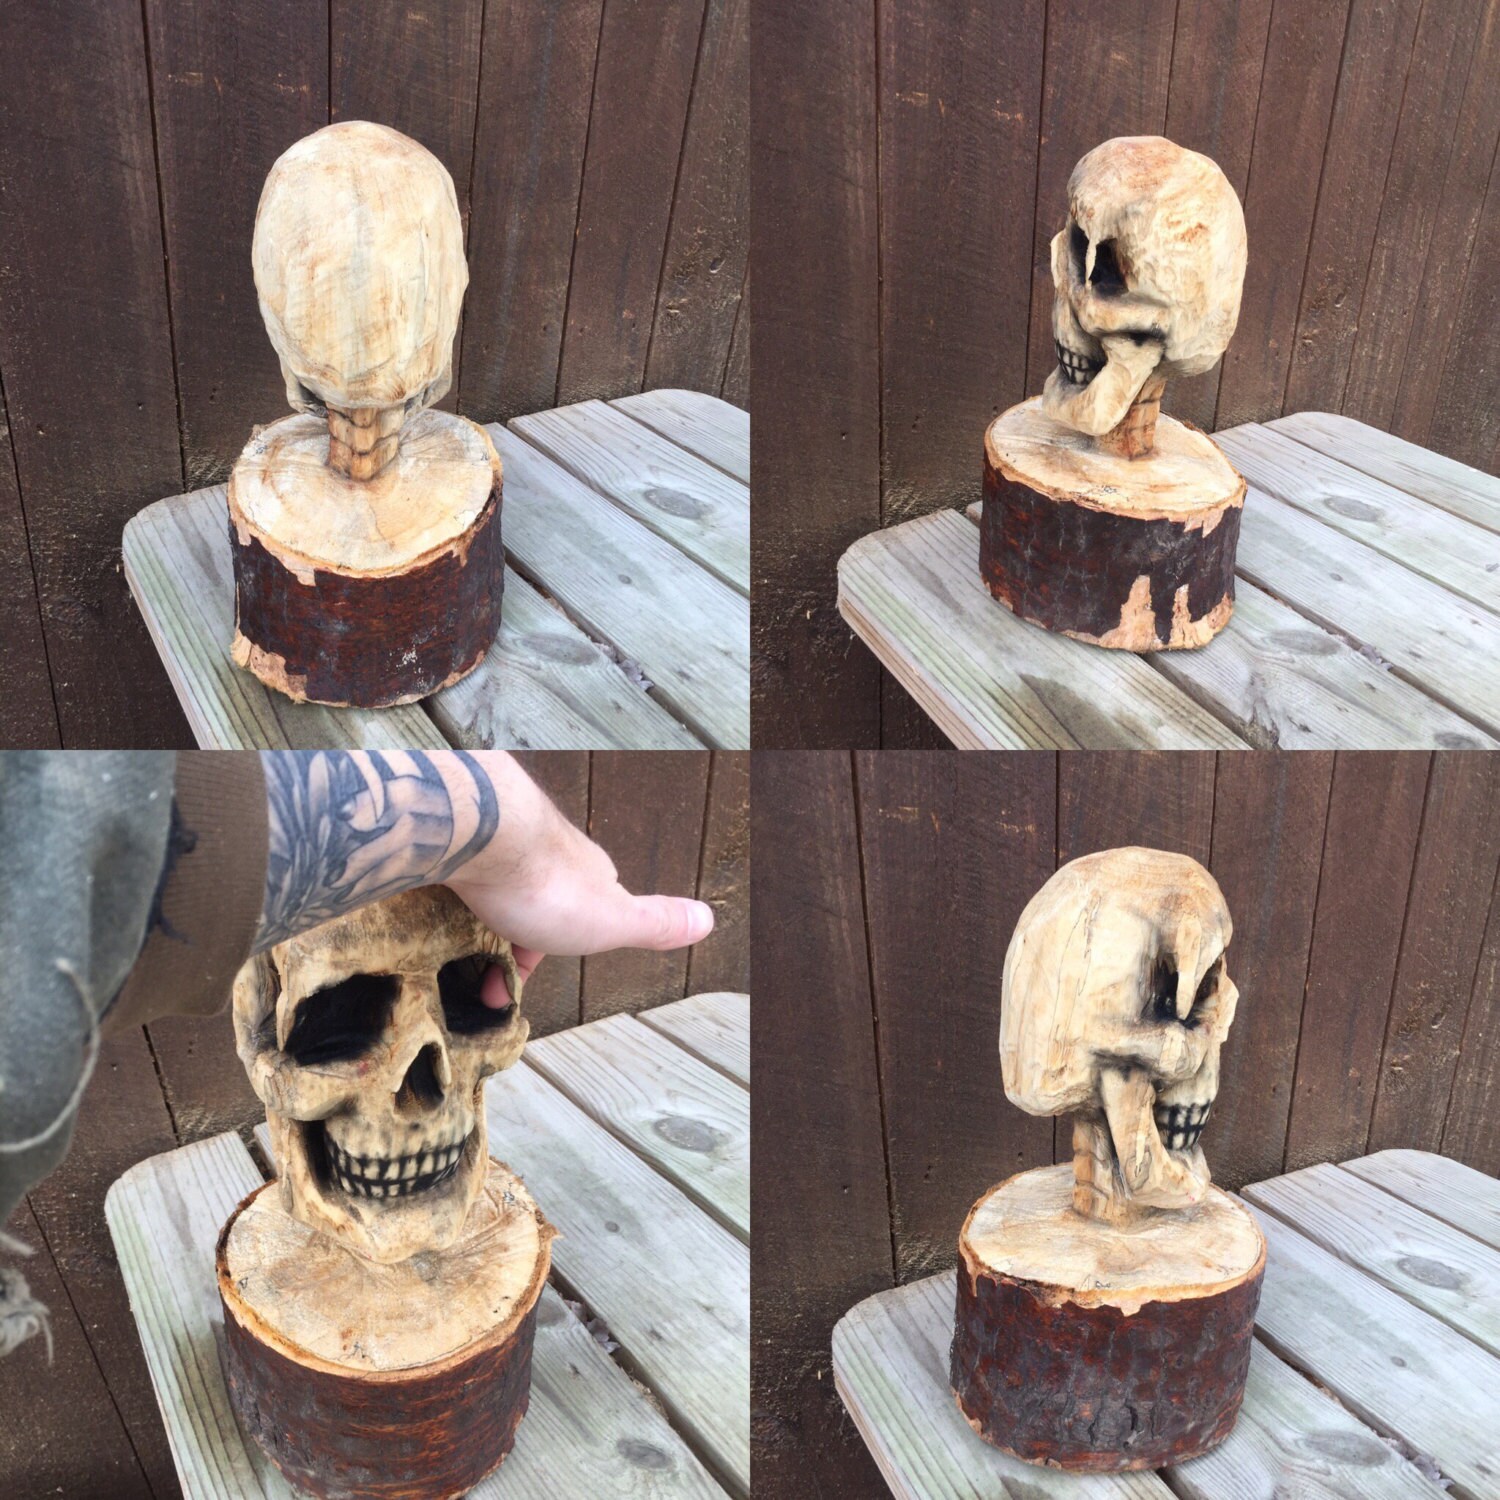 Skull Chainsaw Carving, Wood Carving, Spooky Sculpture 